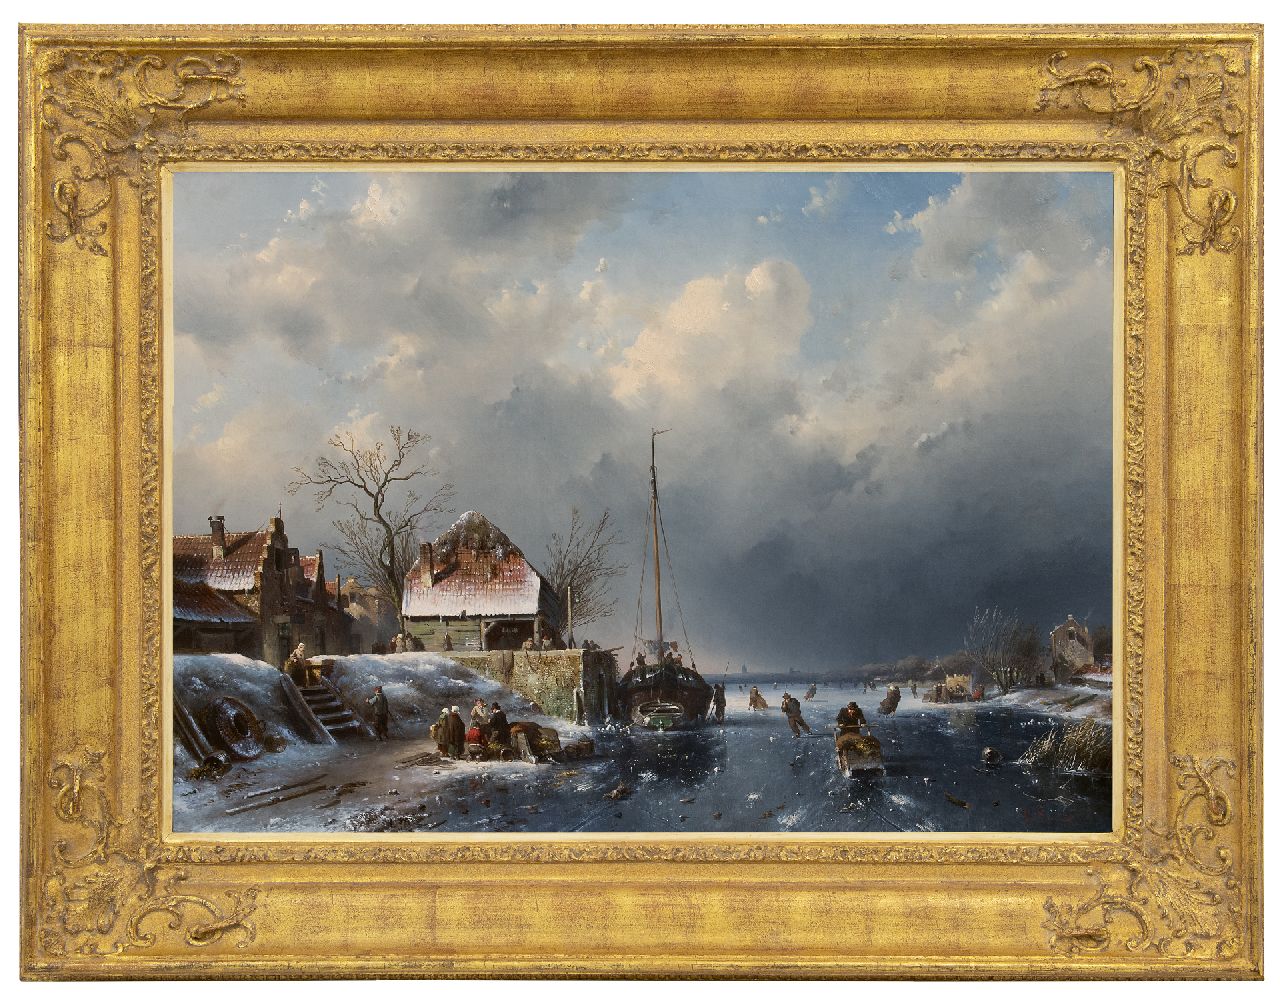 Leickert C.H.J.  | 'Charles' Henri Joseph Leickert | Paintings offered for sale | A winter scene with skaters and a fishing ship stuck in the ice, oil on canvas 60.4 x 84.8 cm, signed l.r. and dated '56